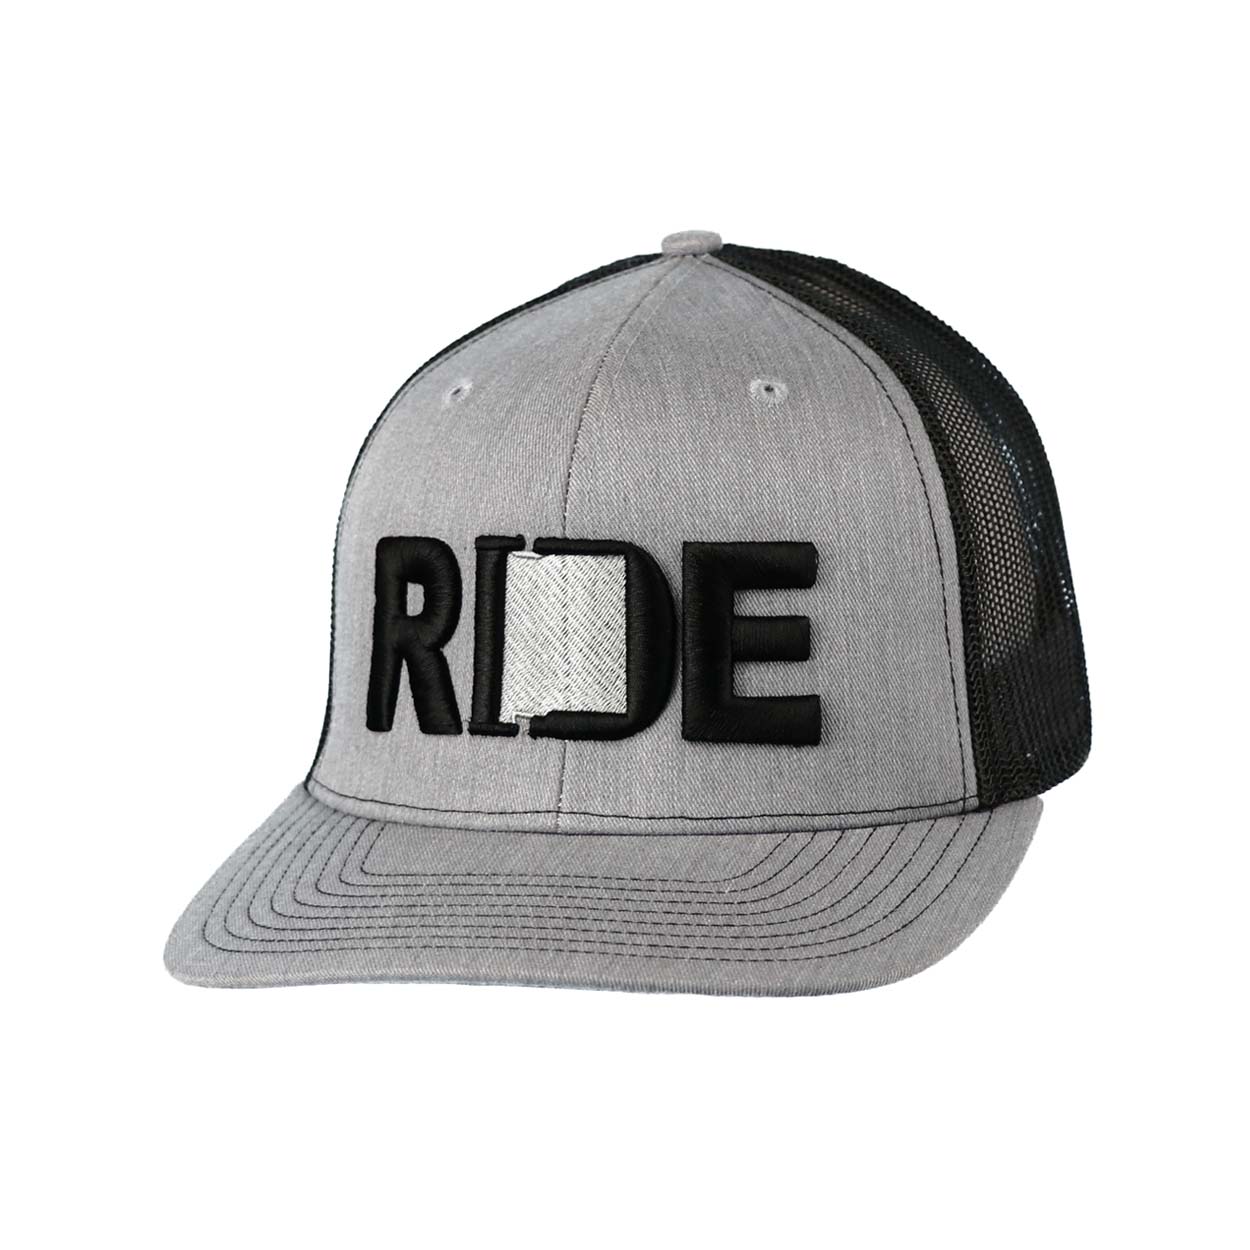 Ride New Mexico Classic Embroidered Snapback Trucker Hat Heather Gray/Black